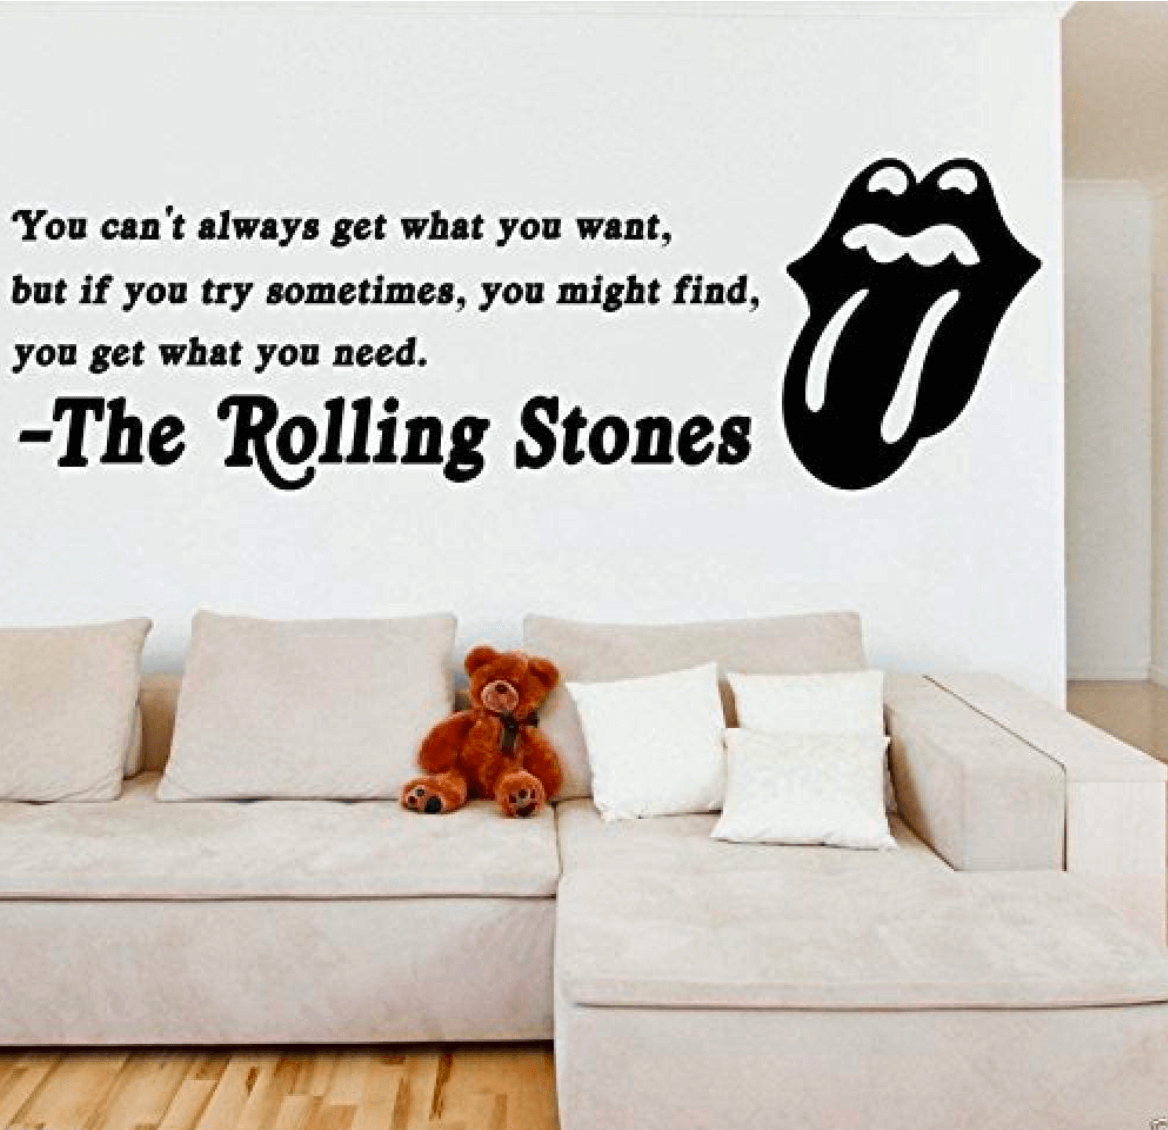 The decorative style for rock legends